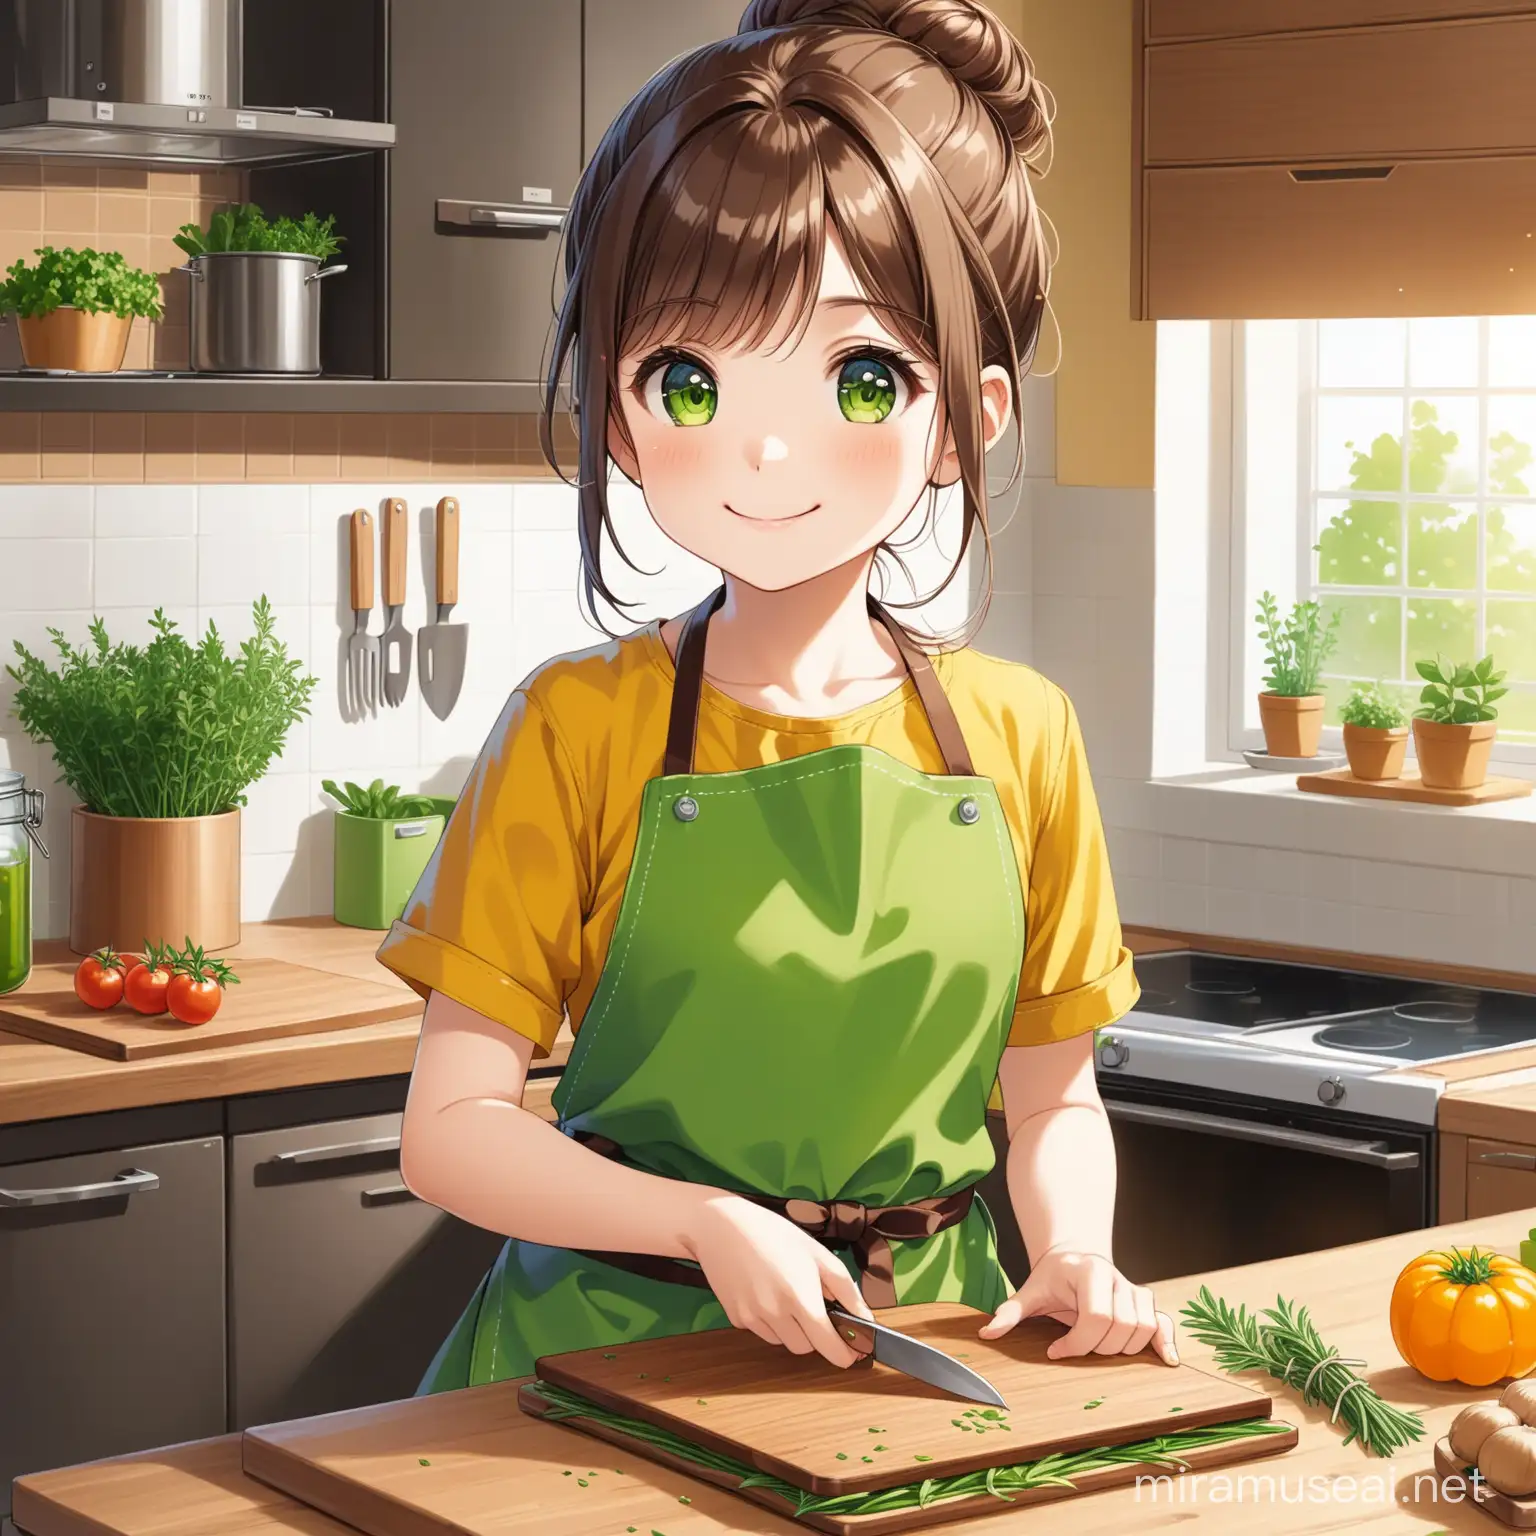 Cheerful Young Girl Cooking with Fresh Herbs in a Vibrant Kitchen